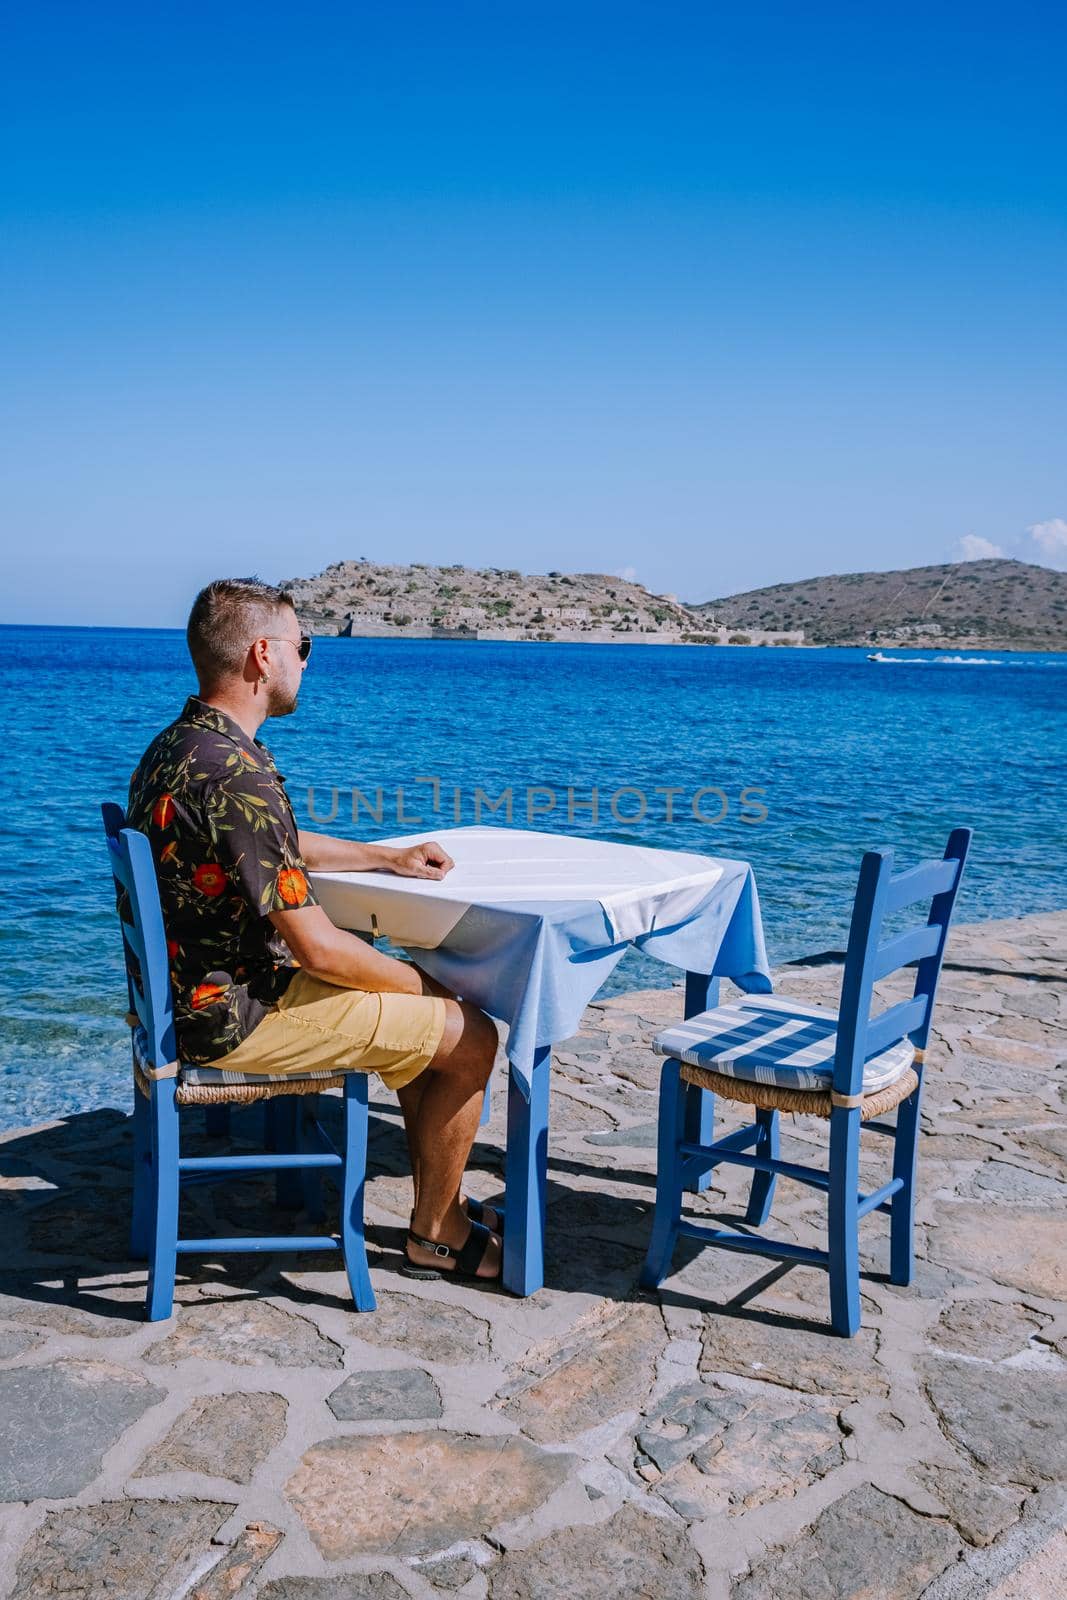 Crete Greece Plaka Lassithi with is traditional blue table and chairs and the beach in Crete Greece. Paralia Plakas, Plaka village Crete, young men mid age having lunch greek taverne